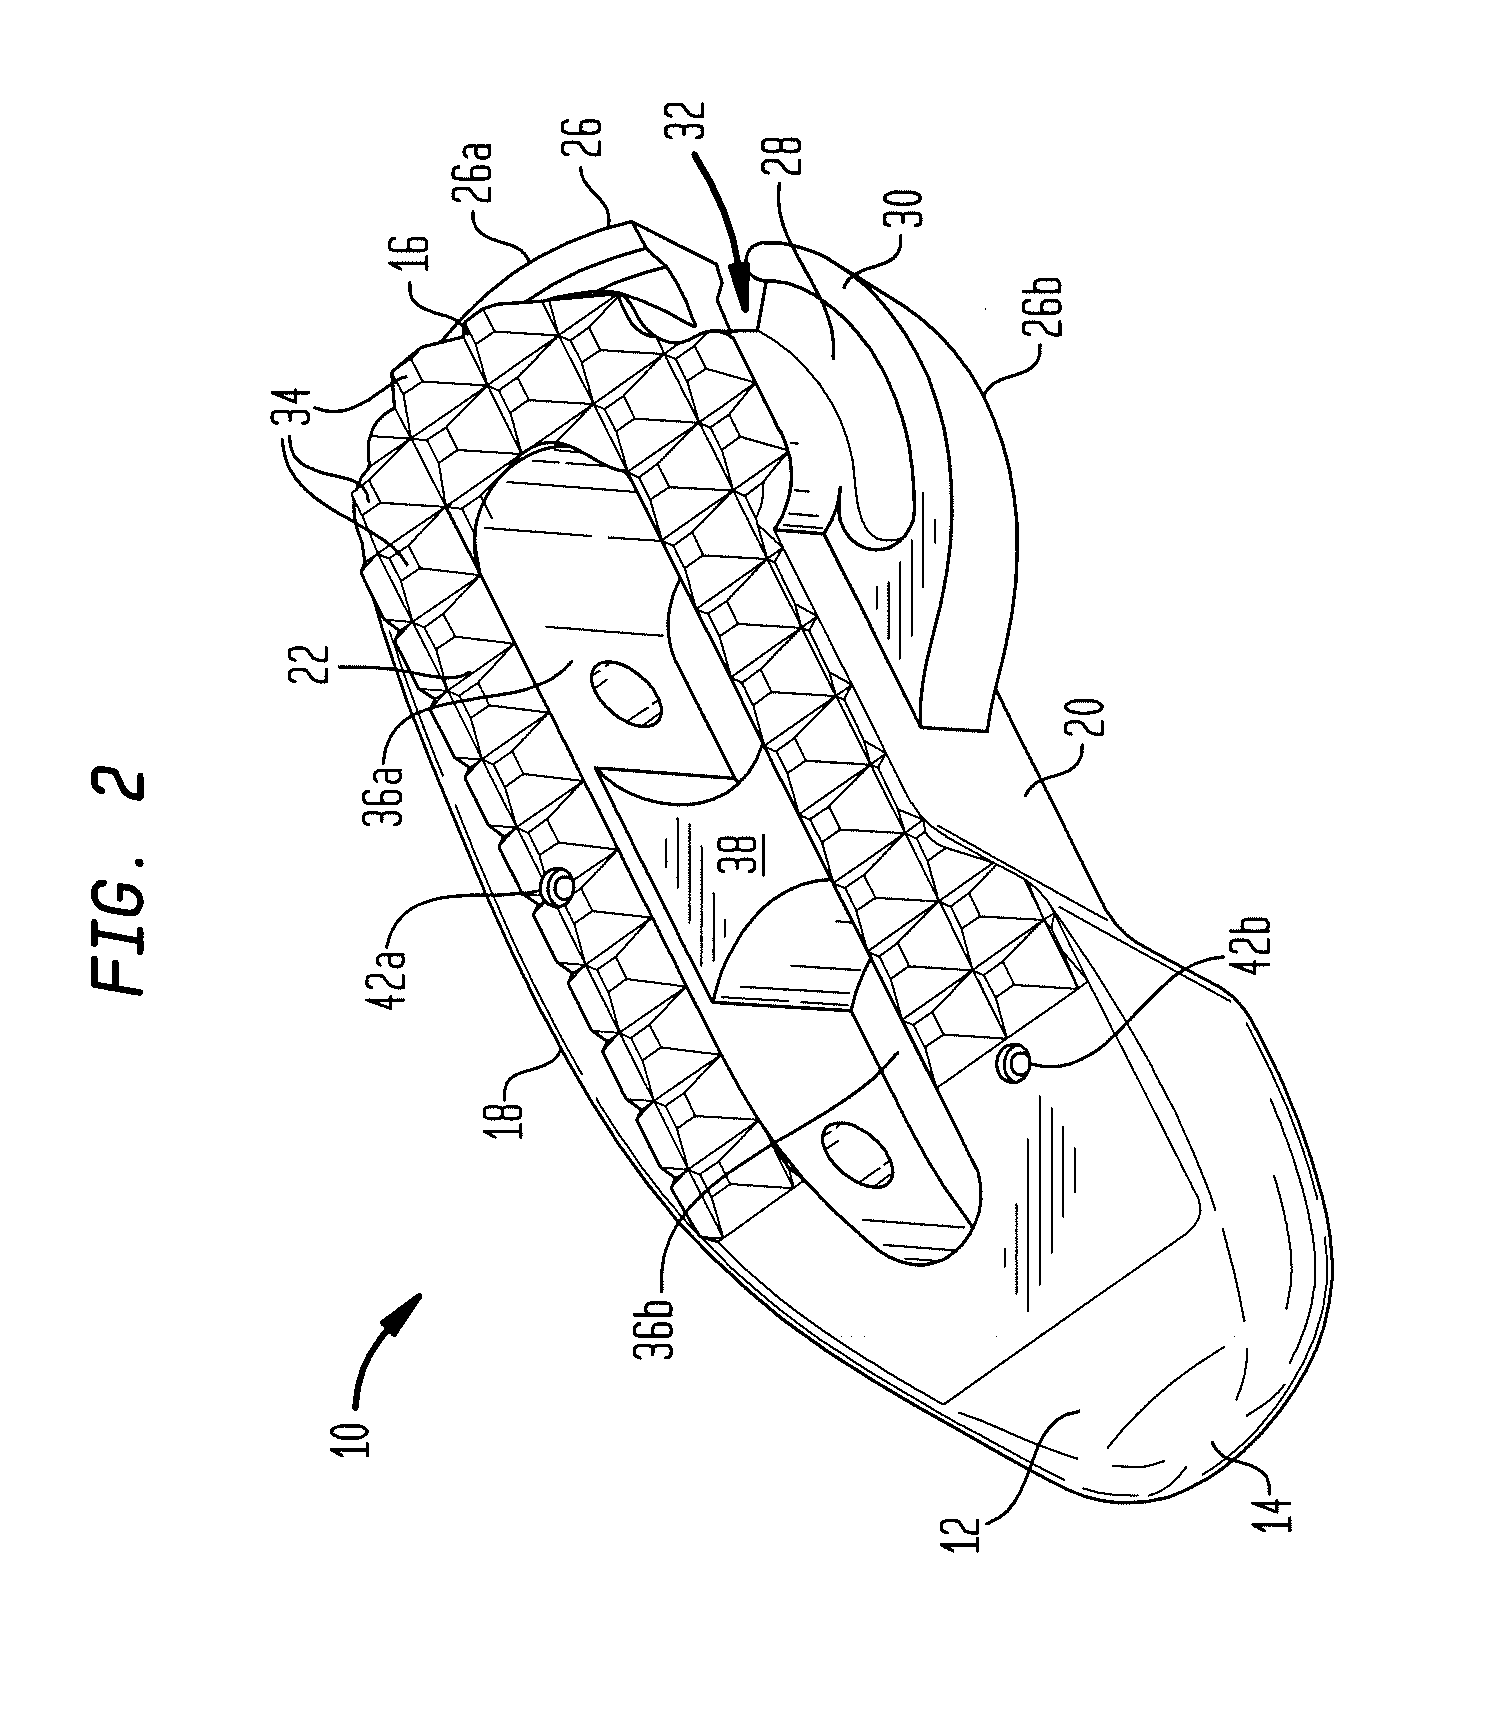 Instrument for inserting surgical implant with guiding rail